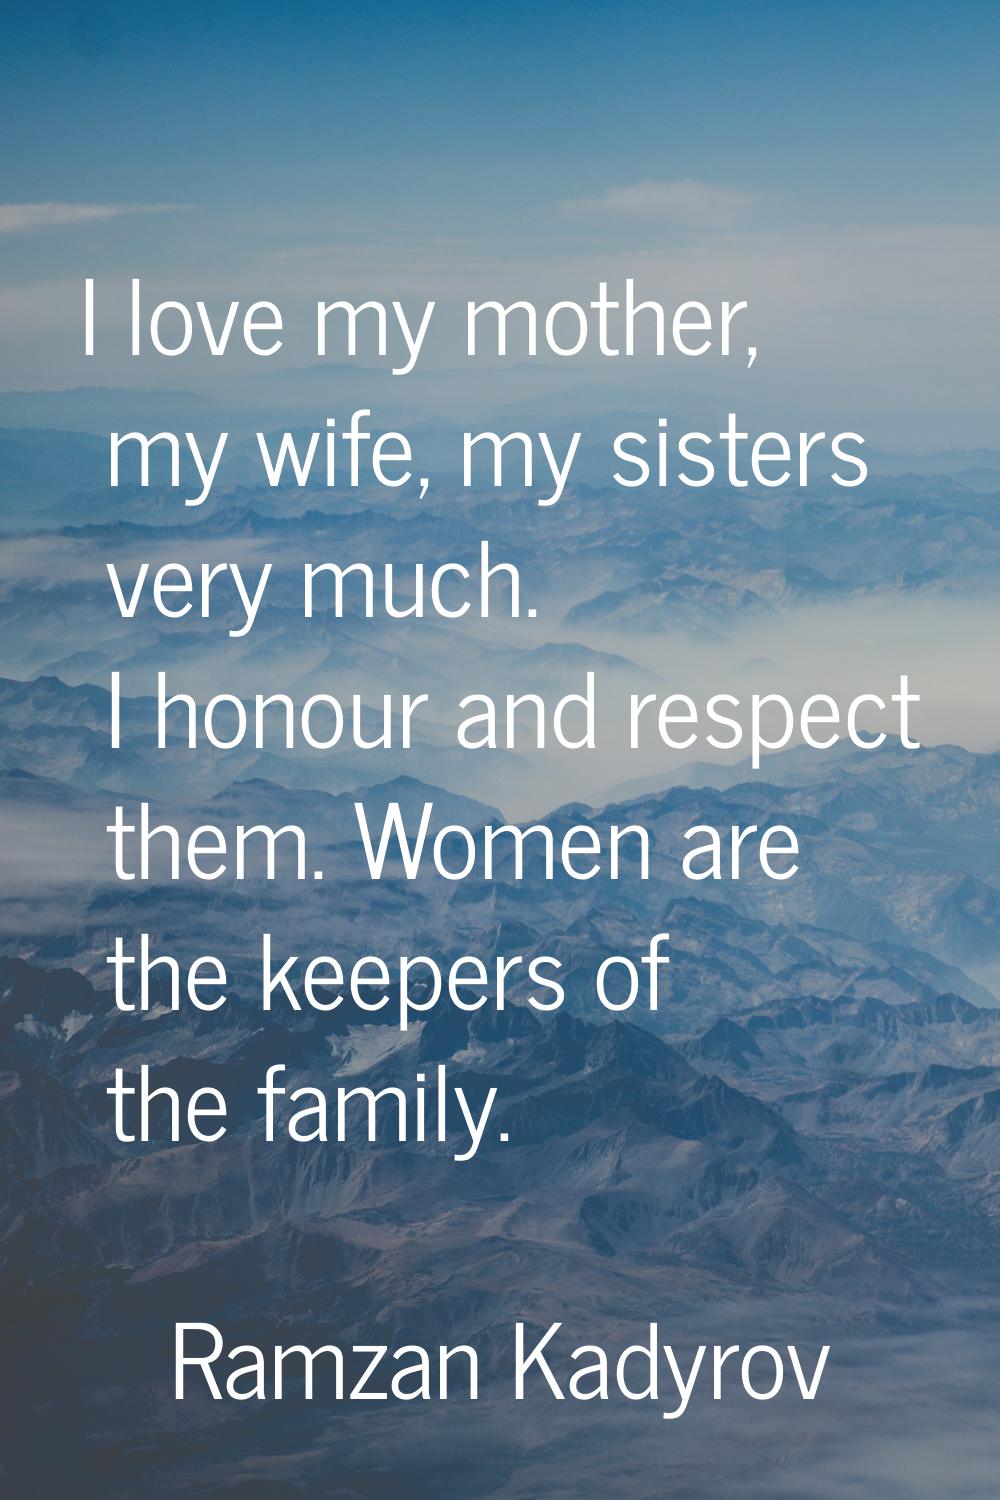 I love my mother, my wife, my sisters very much. I honour and respect them. Women are the keepers o